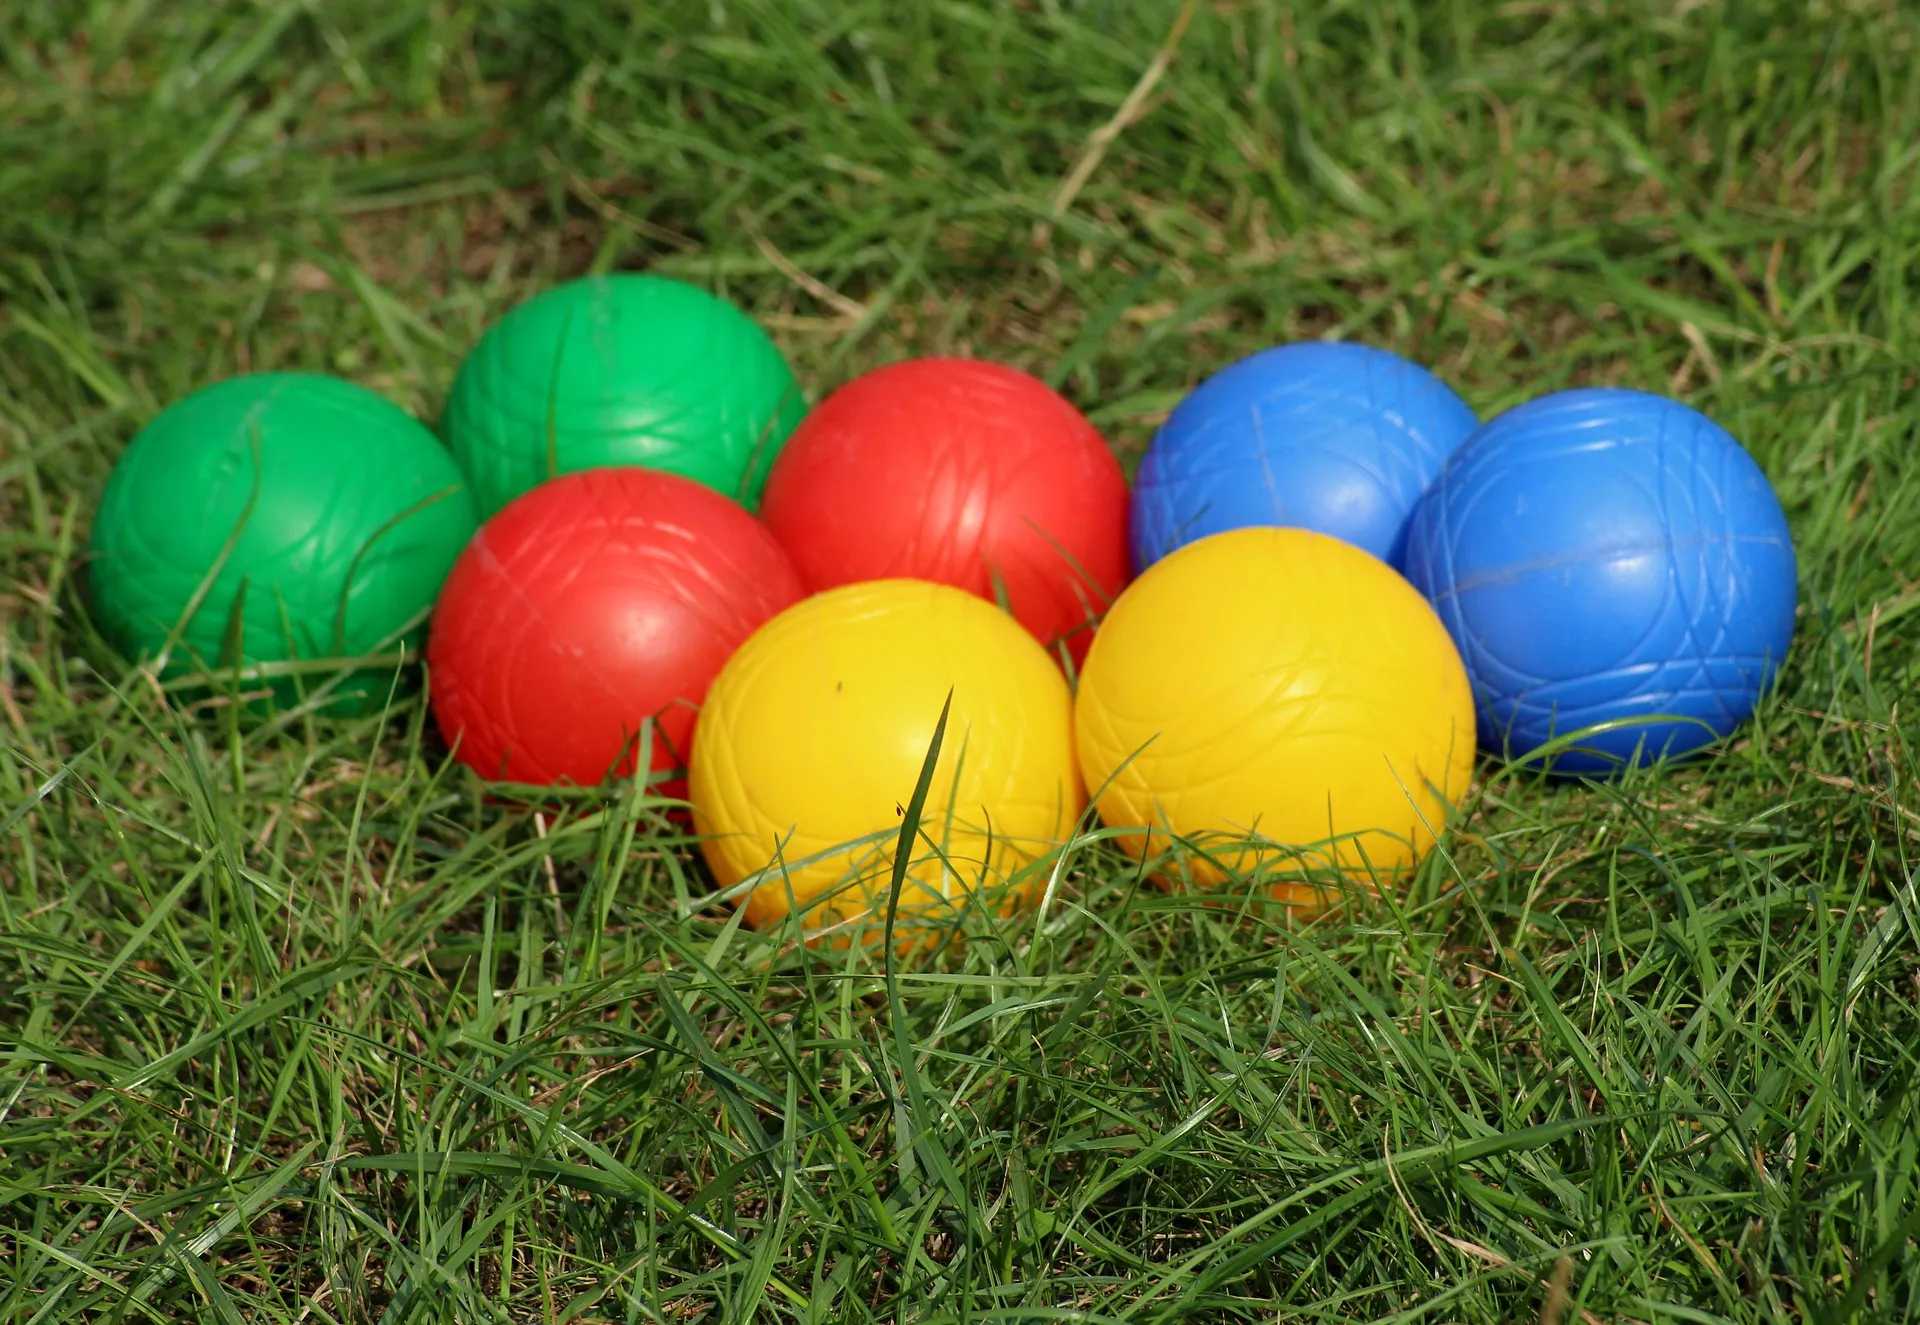 Club Petanque d'Orion in Netherlands, Europe | Petanque - Rated 0.9